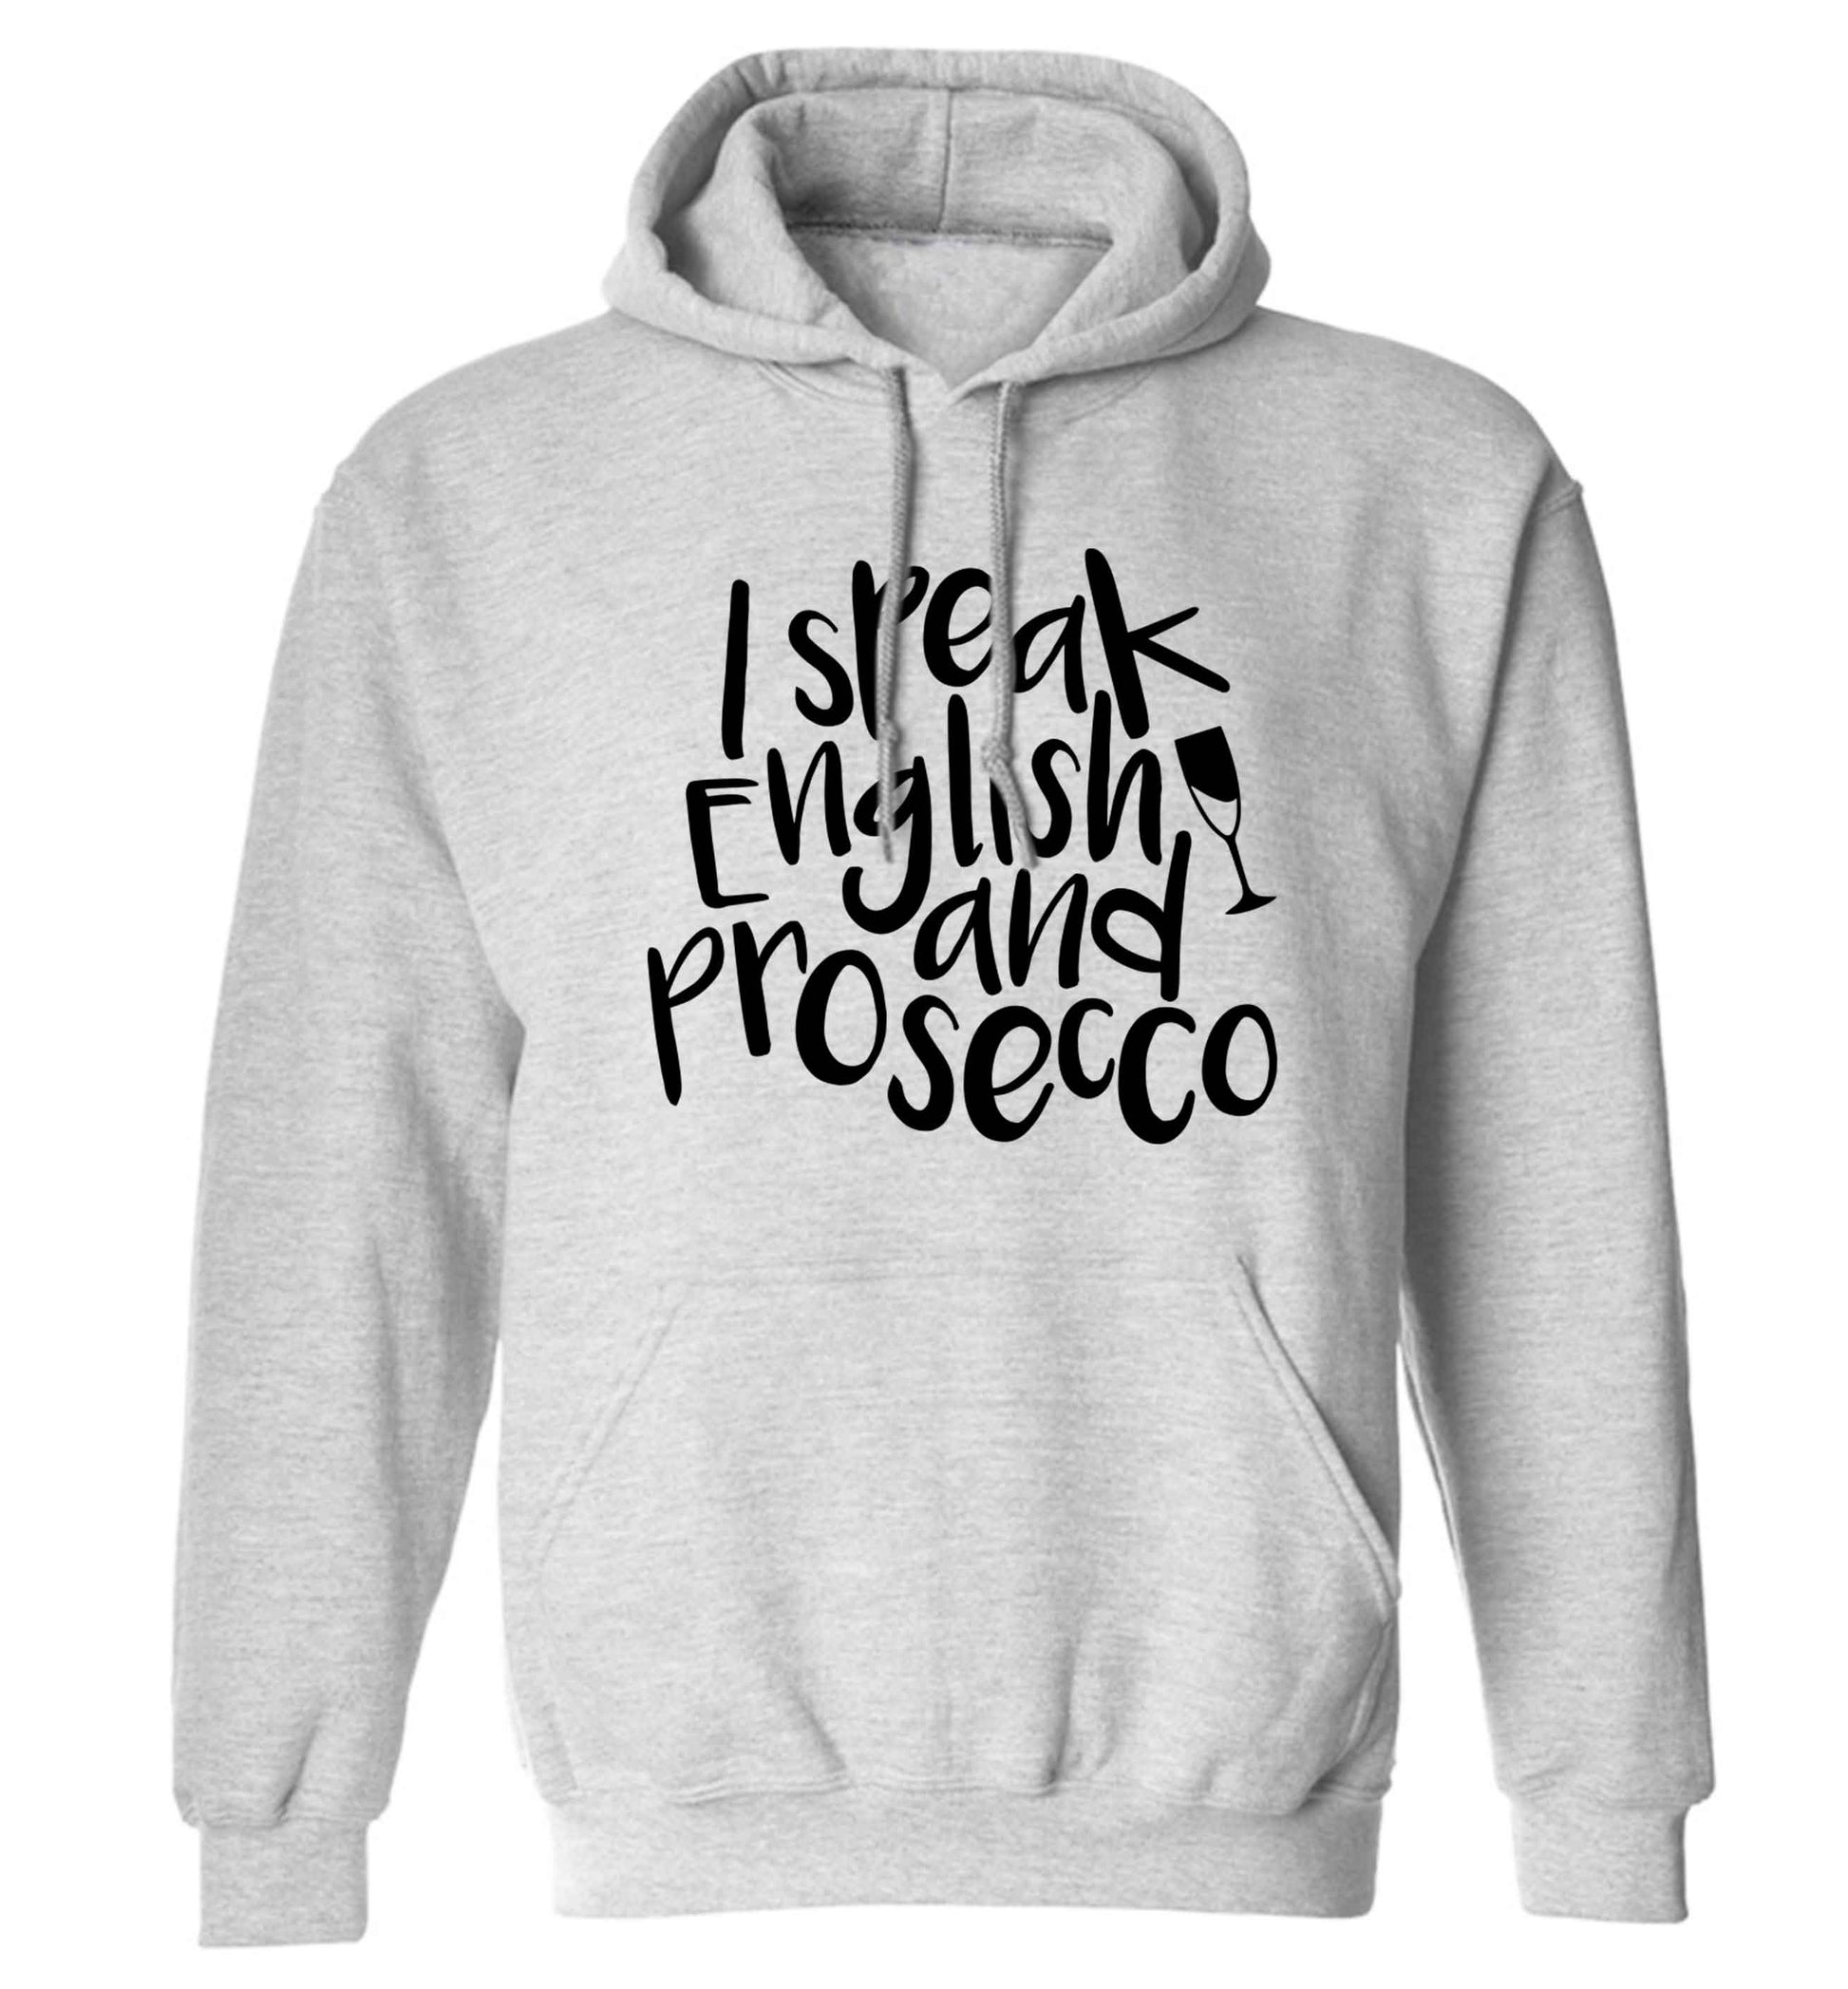 I speak English and prosecco adults unisex grey hoodie 2XL